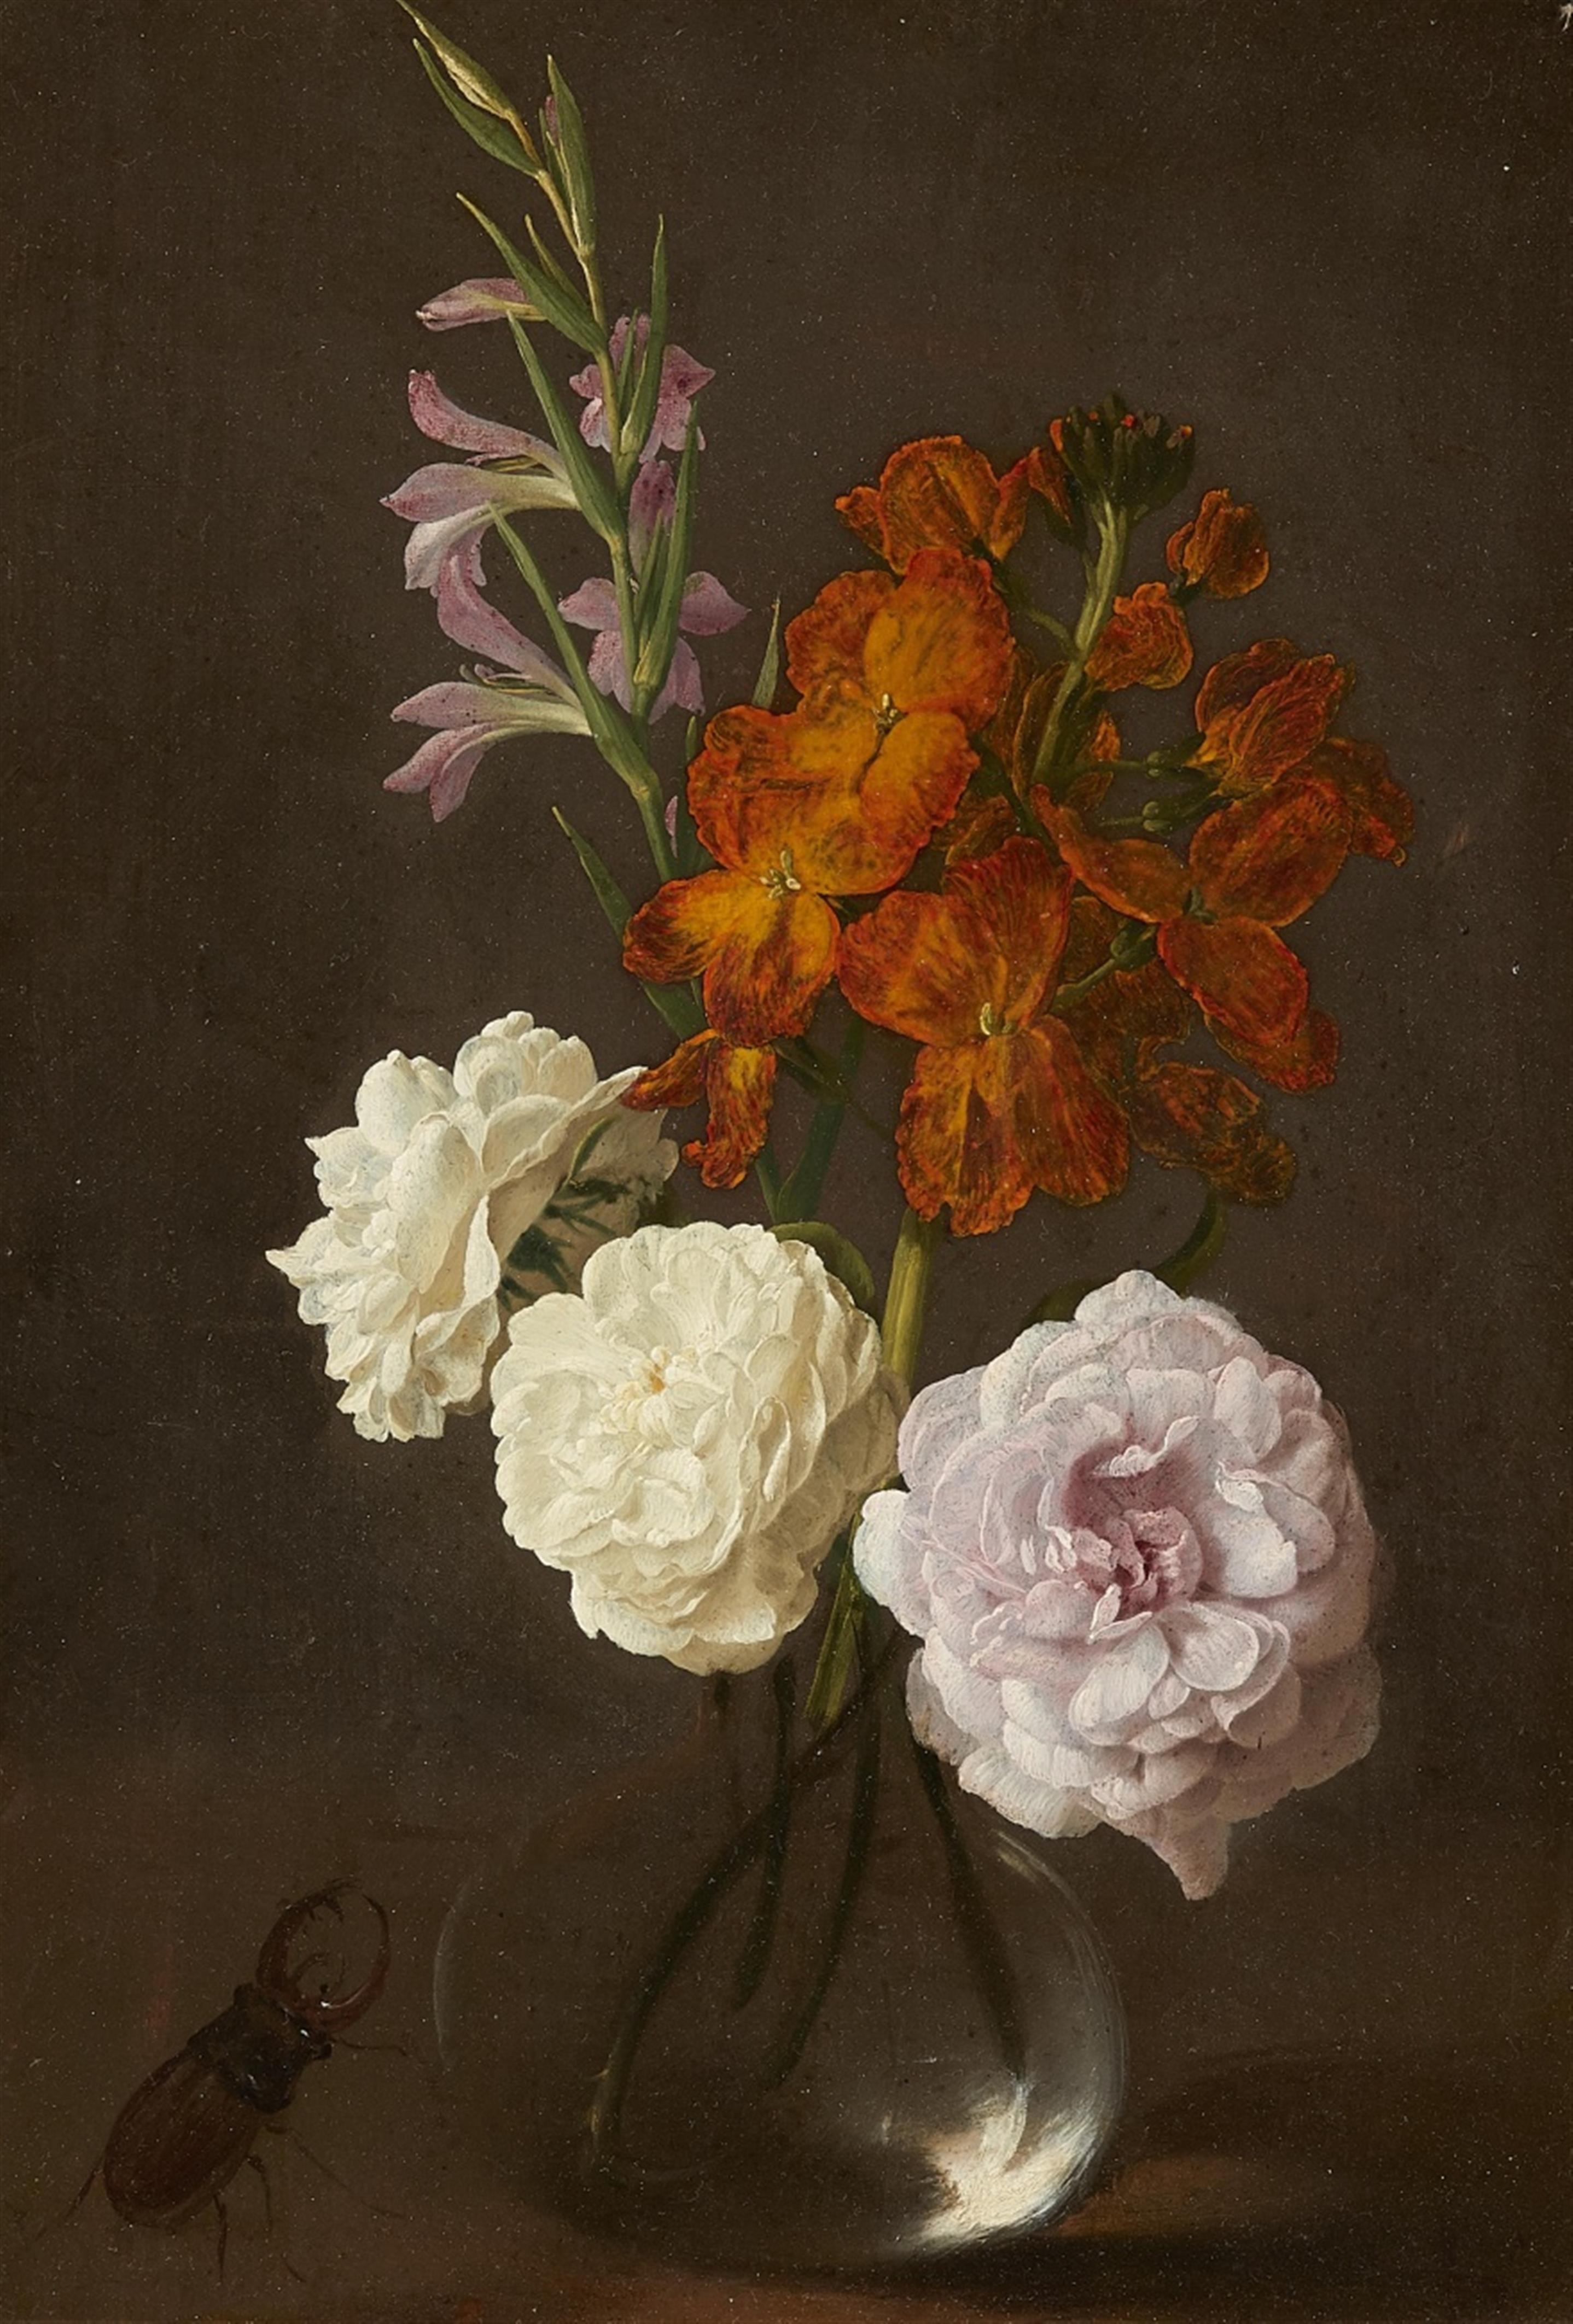 German School 19th century - Flower Still Life with Gladioli, Wallflowers, Roses, and a Stag Beetle - image-1